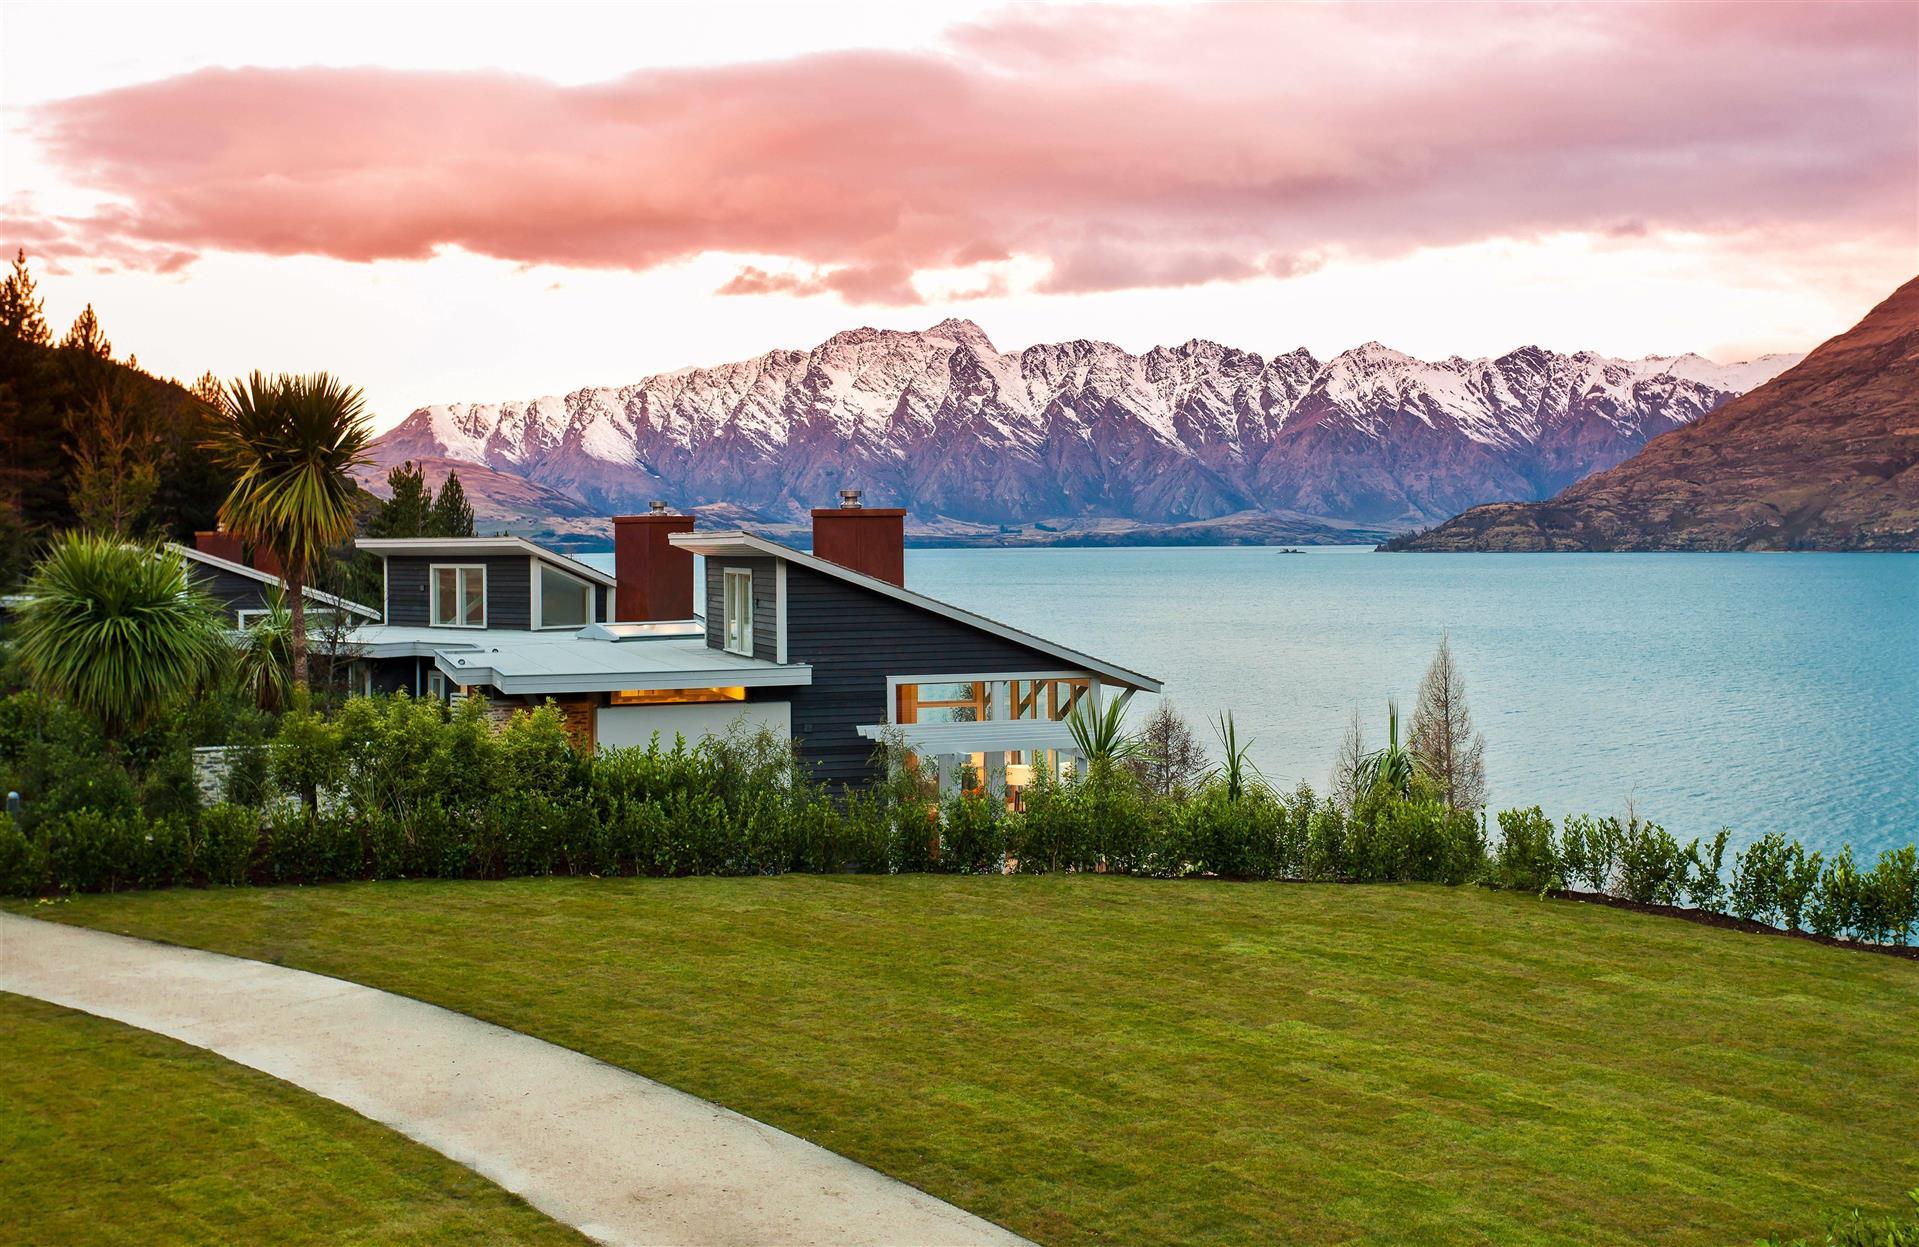 Rosewood Matakauri (Accepting reservations now for December 1, 2023 onwards) in Queenstown, NZ